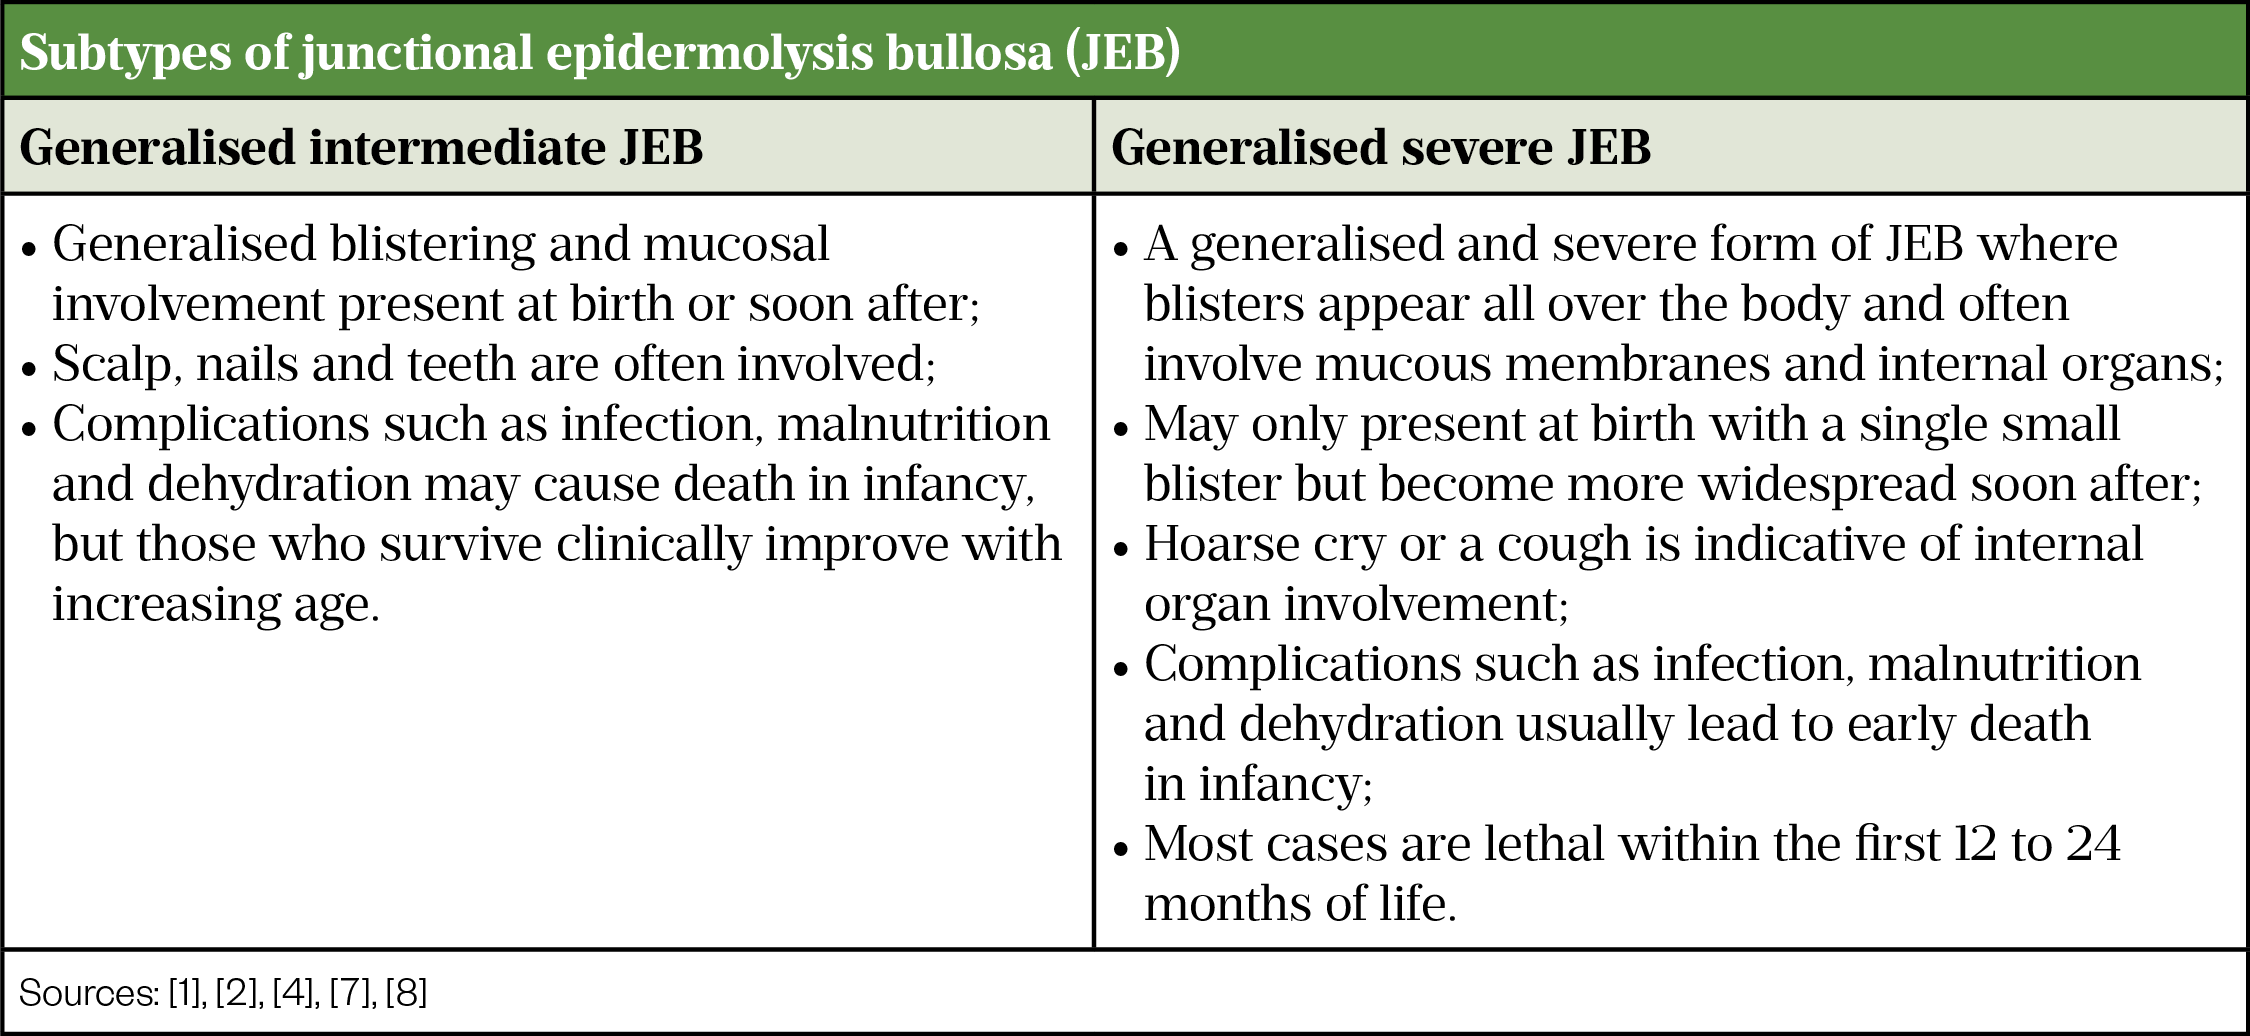 Table 3. Subtypes of junctional epidermolysis bullosa (JEB)